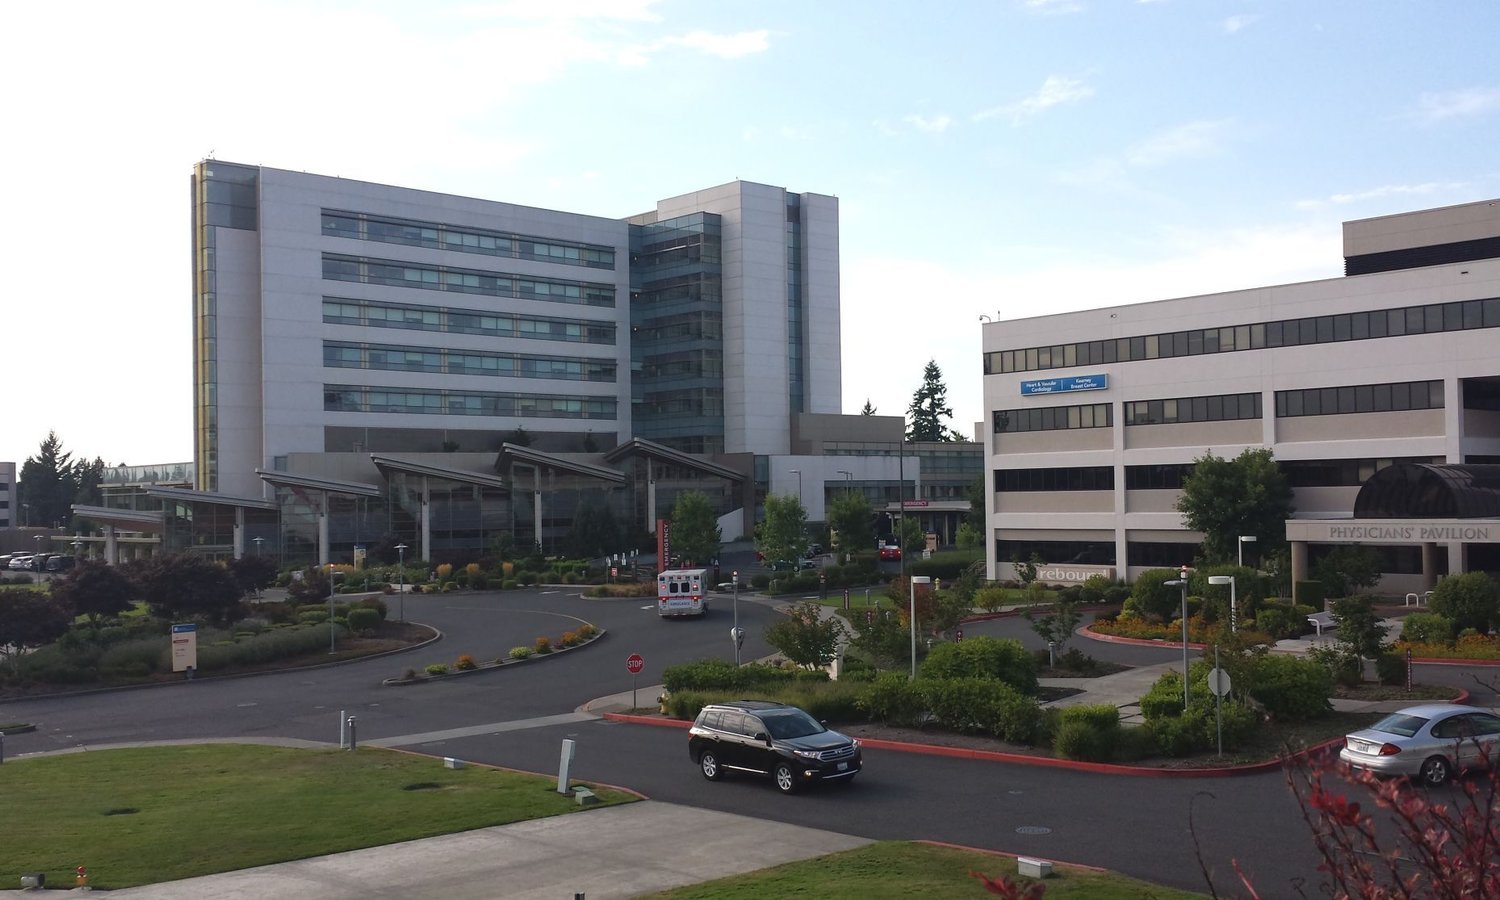 PeaceHealth Southwest Medical Center in Vancouver